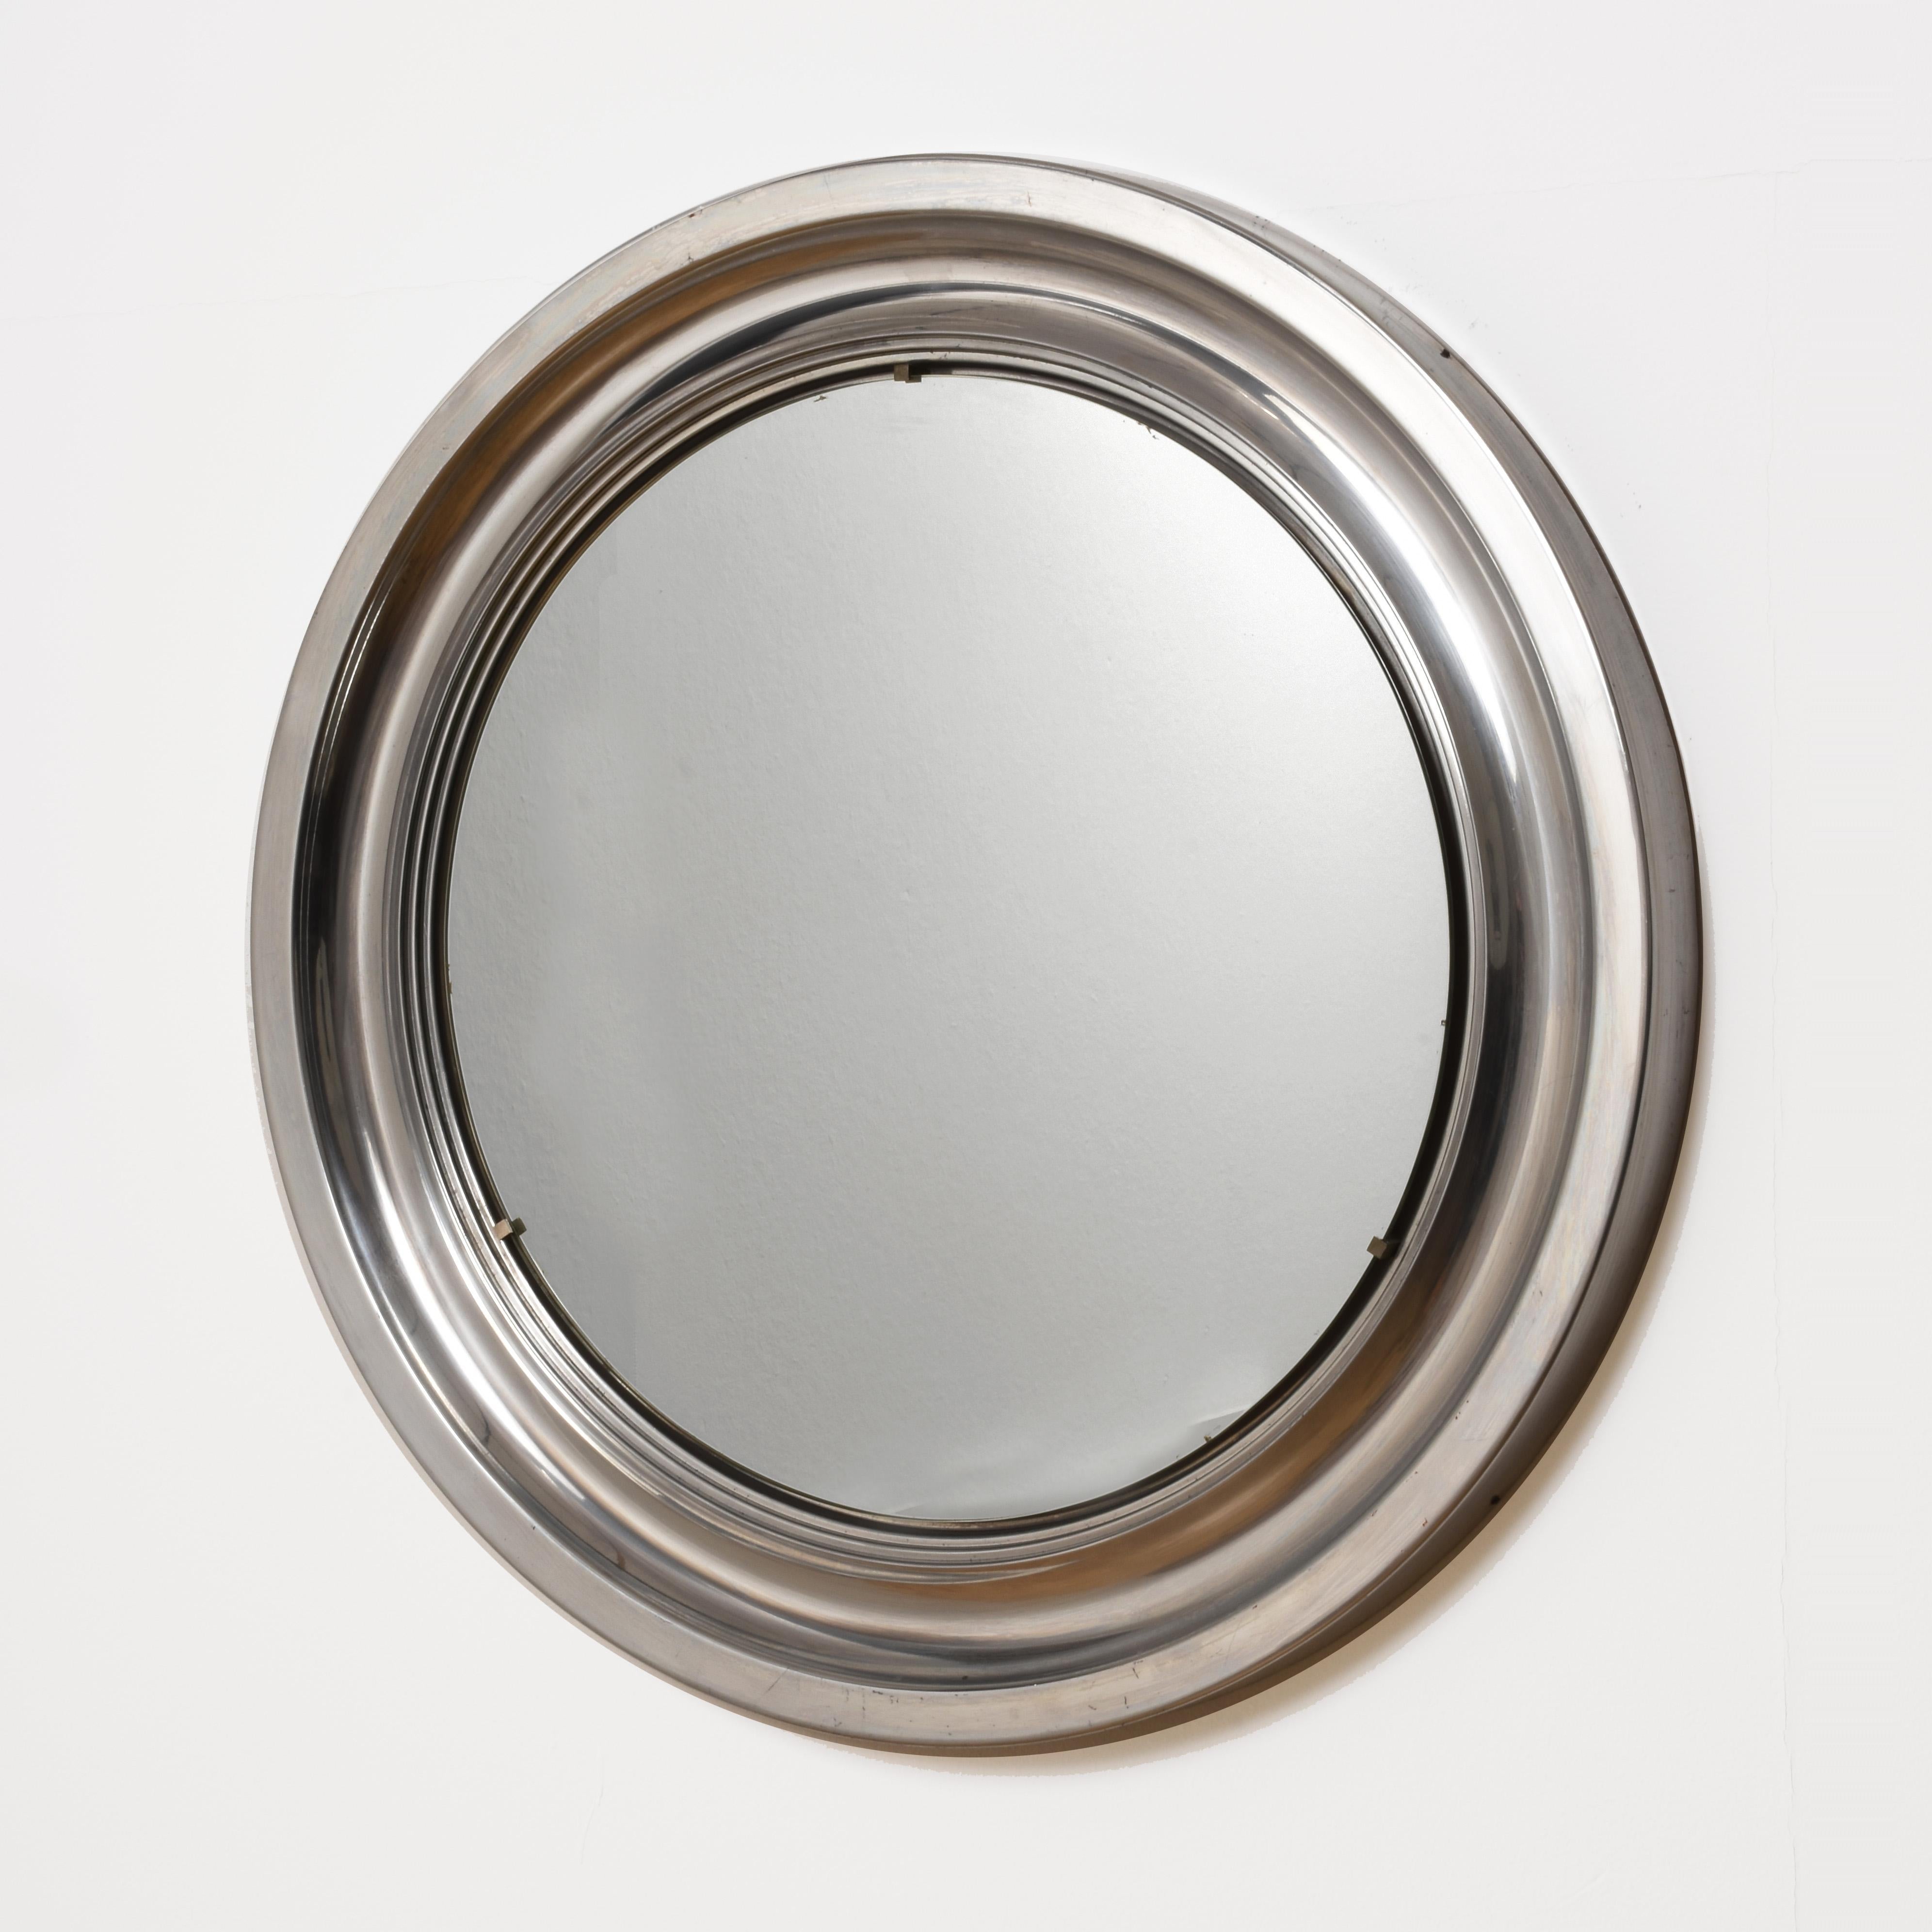 Attributable to Sergio Mazza for Artemide
Italian modernist aluminum mirror.
The original mirror in the centre is in excellent condition and the frame has a concave centre that creates depth and texture. This simple mirror is quite surprising and